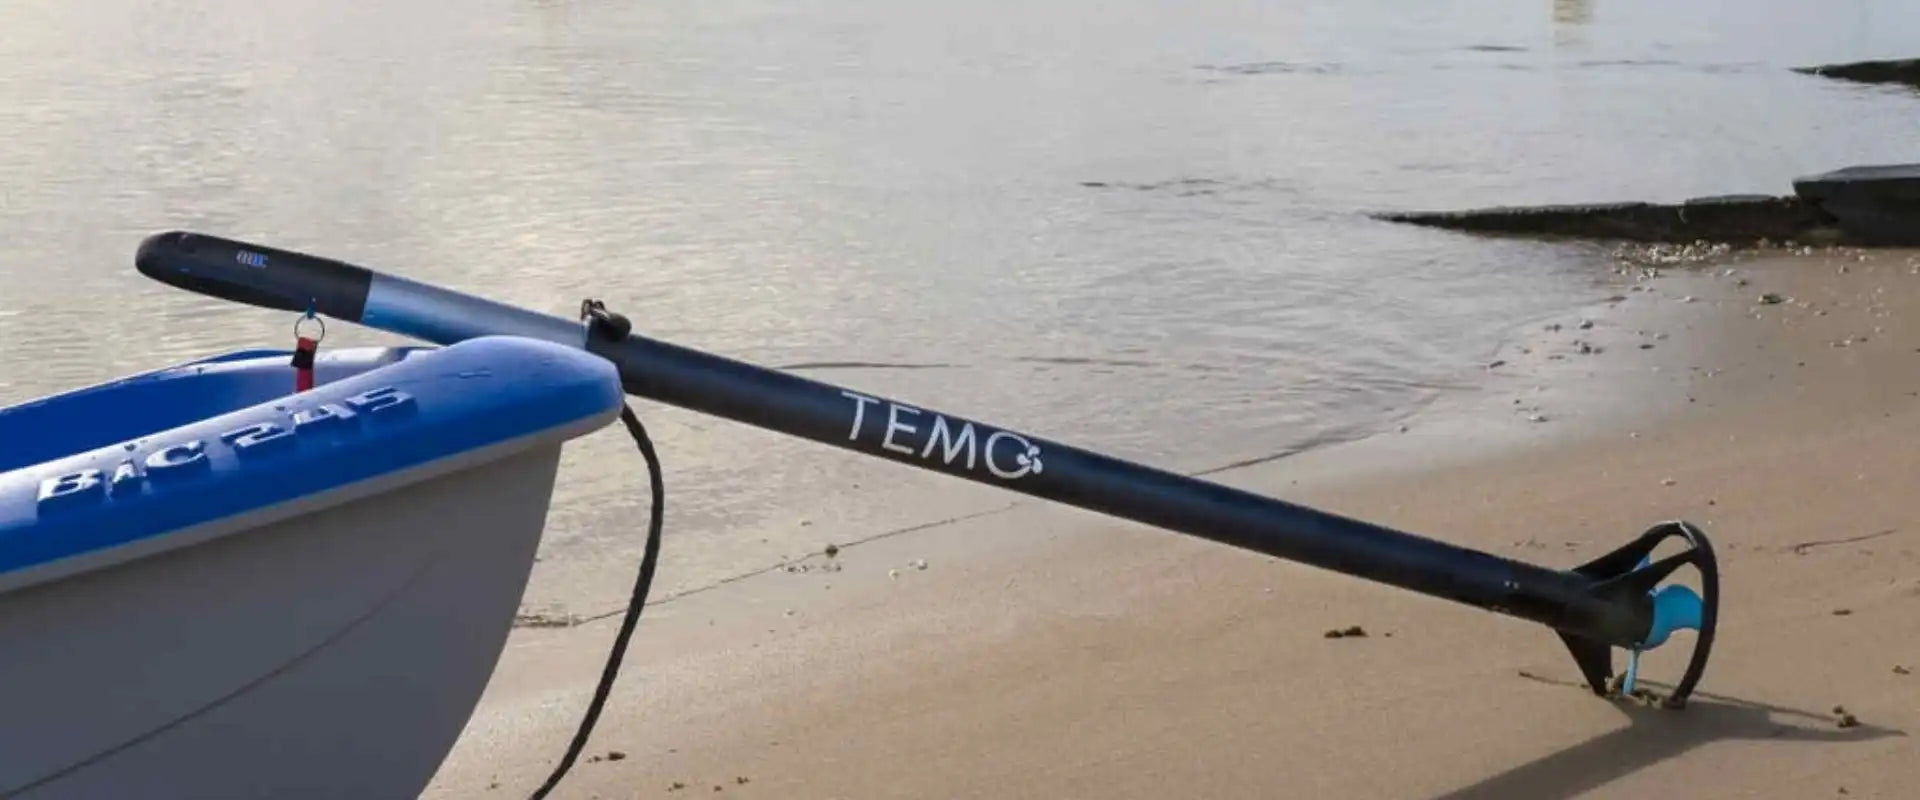 temo the lightest engine in the world